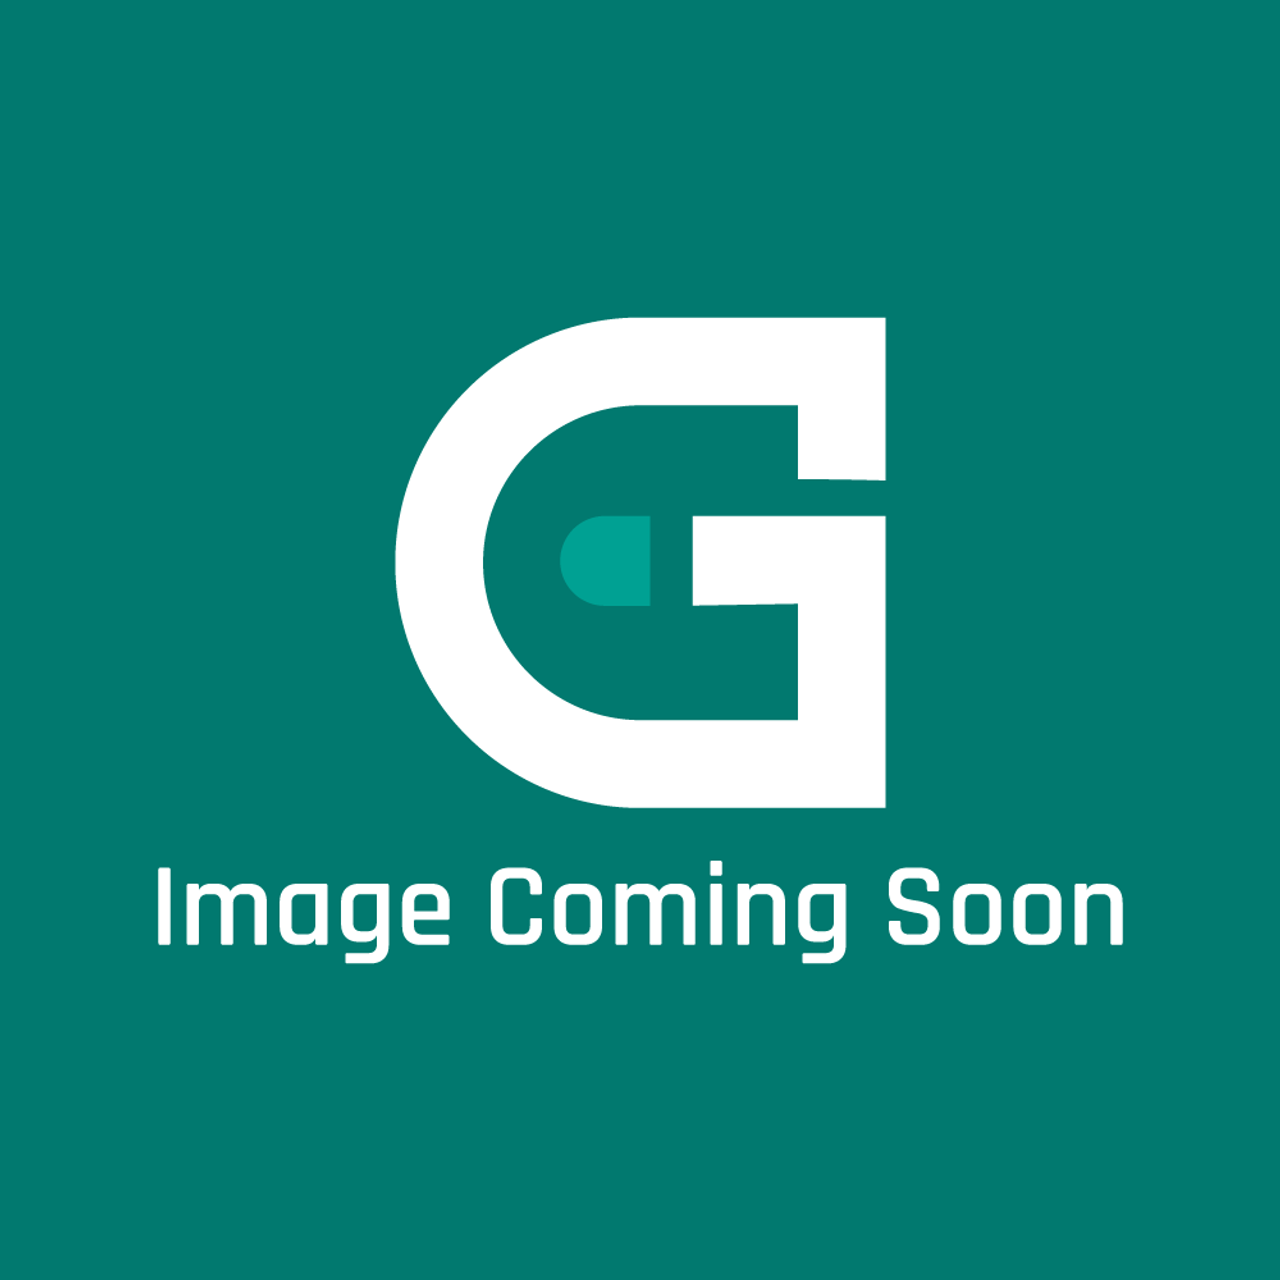 AGA Marvel RS4E301152 - S/A-Flue Chamber Blanking Plate - Image Coming Soon!